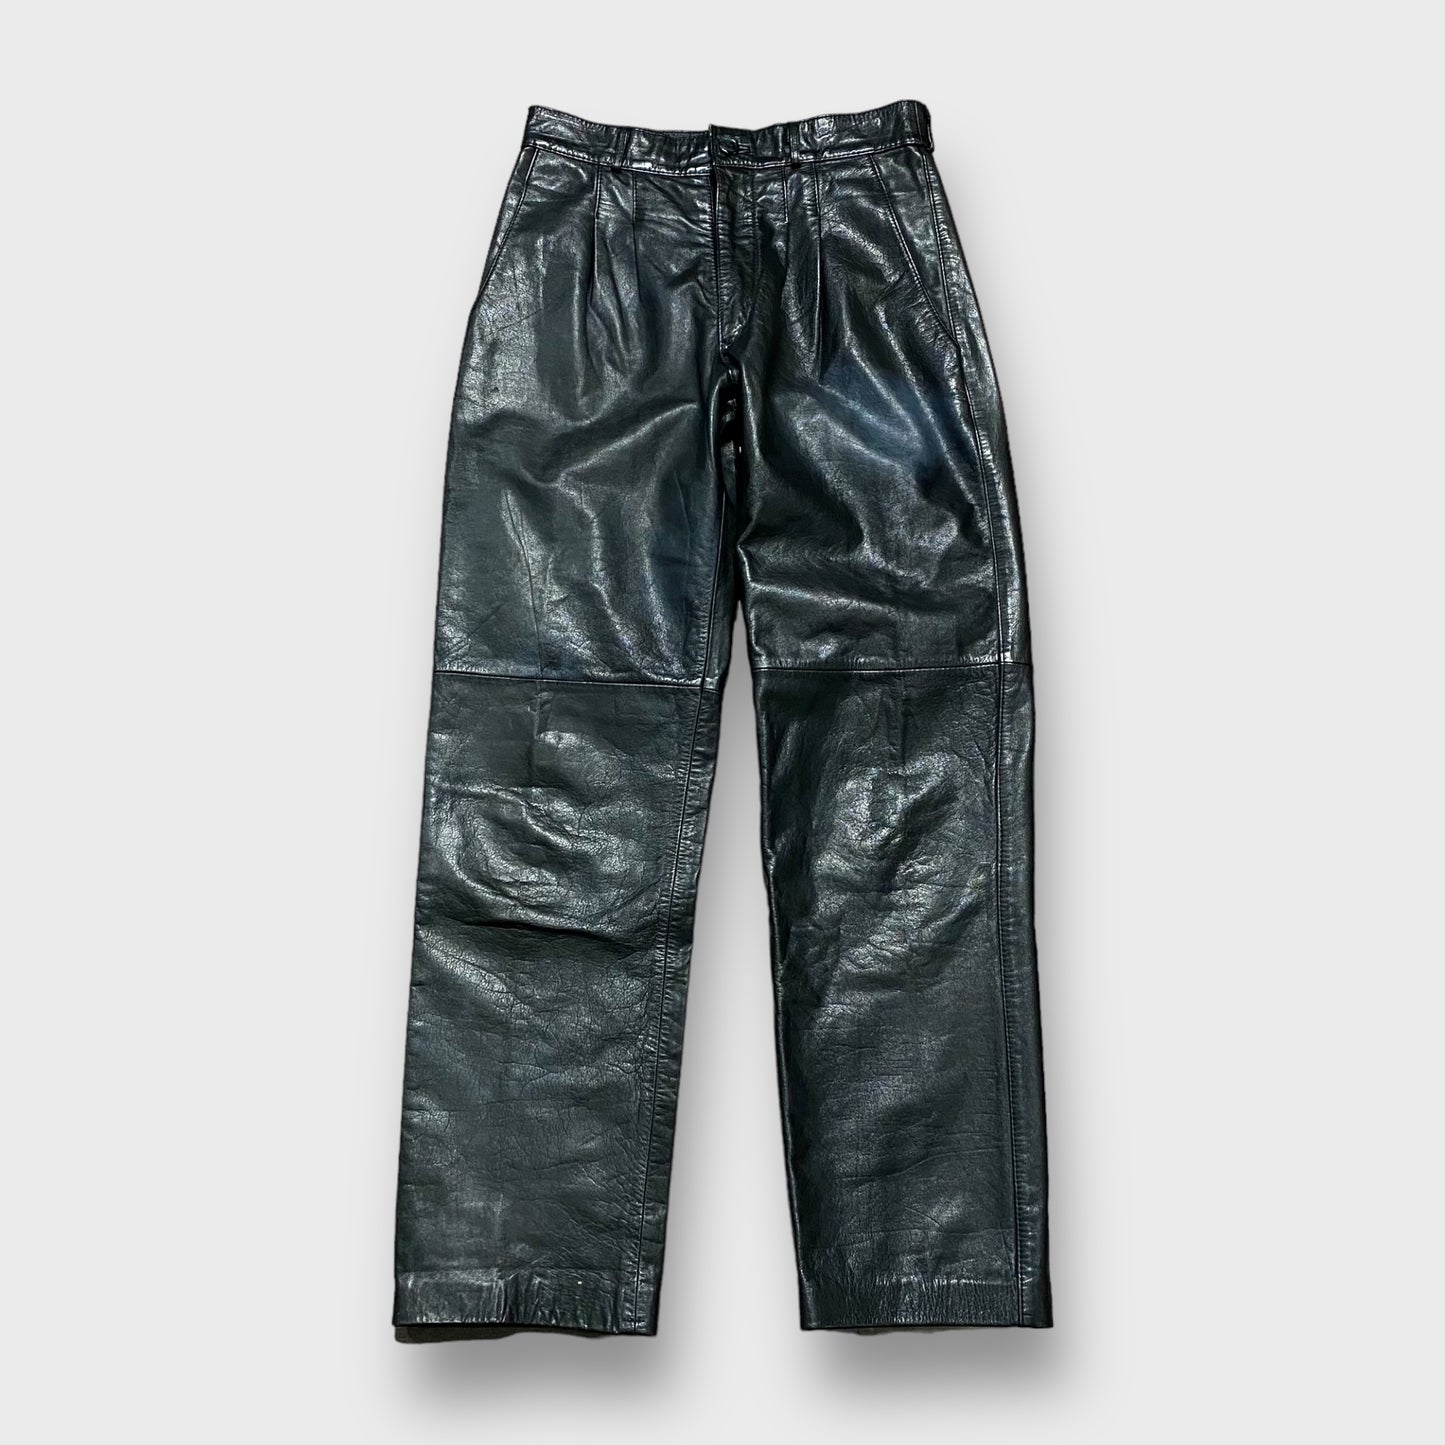 "GARSEL" Leather pants